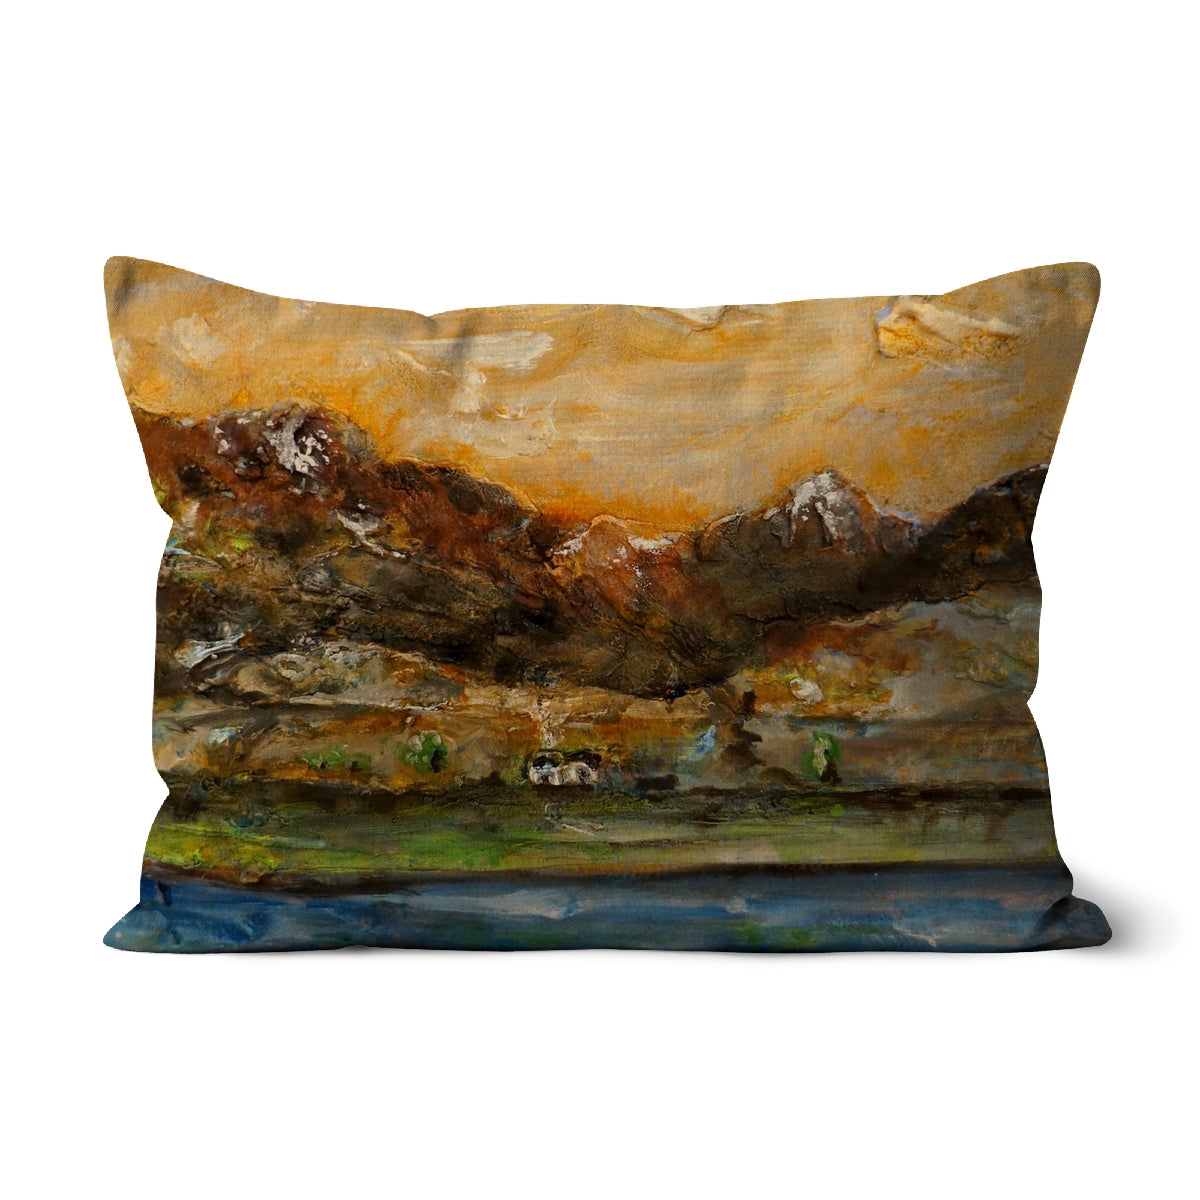 A Glencoe Cottage Art Gifts Cushion-Cushions-Glencoe Art Gallery-Linen-19"x13"-Paintings, Prints, Homeware, Art Gifts From Scotland By Scottish Artist Kevin Hunter